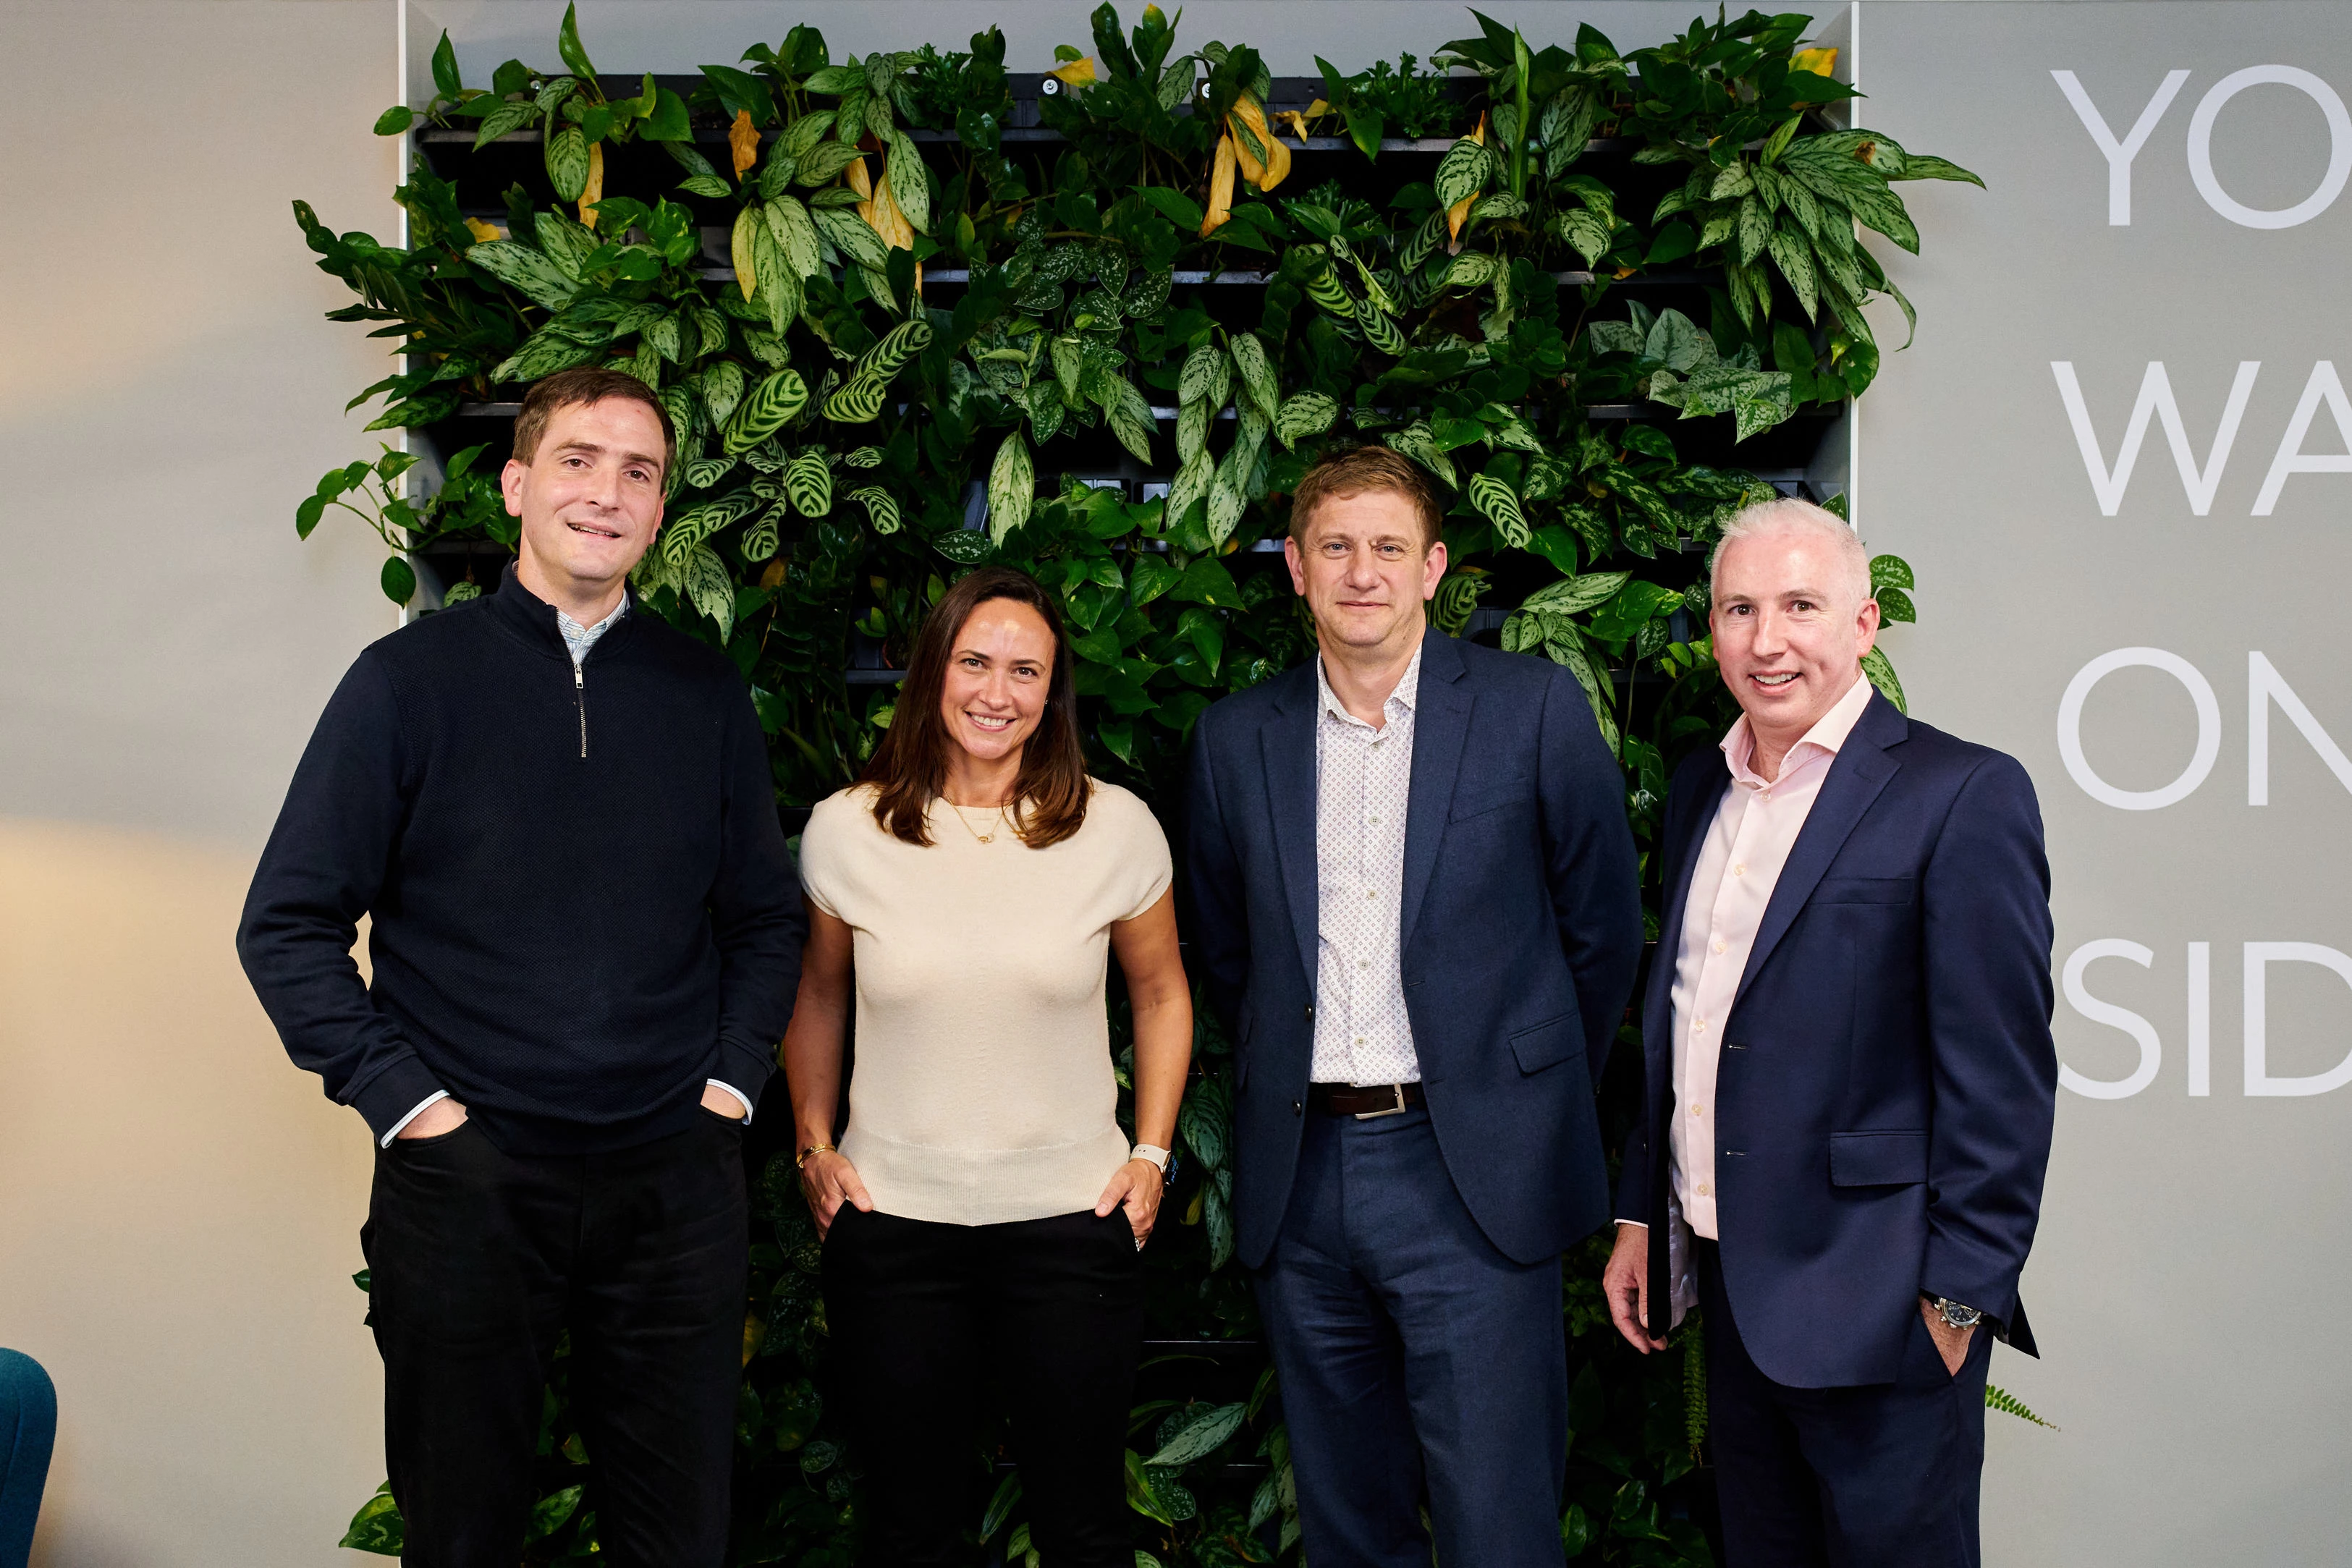 Picture shows (L-R): David Wrench, partner at YFM); with the Vuealta team comprising Jayne Stone, head of marketing, Adam Bimson, CCO, and Ian Stone, CEO. 